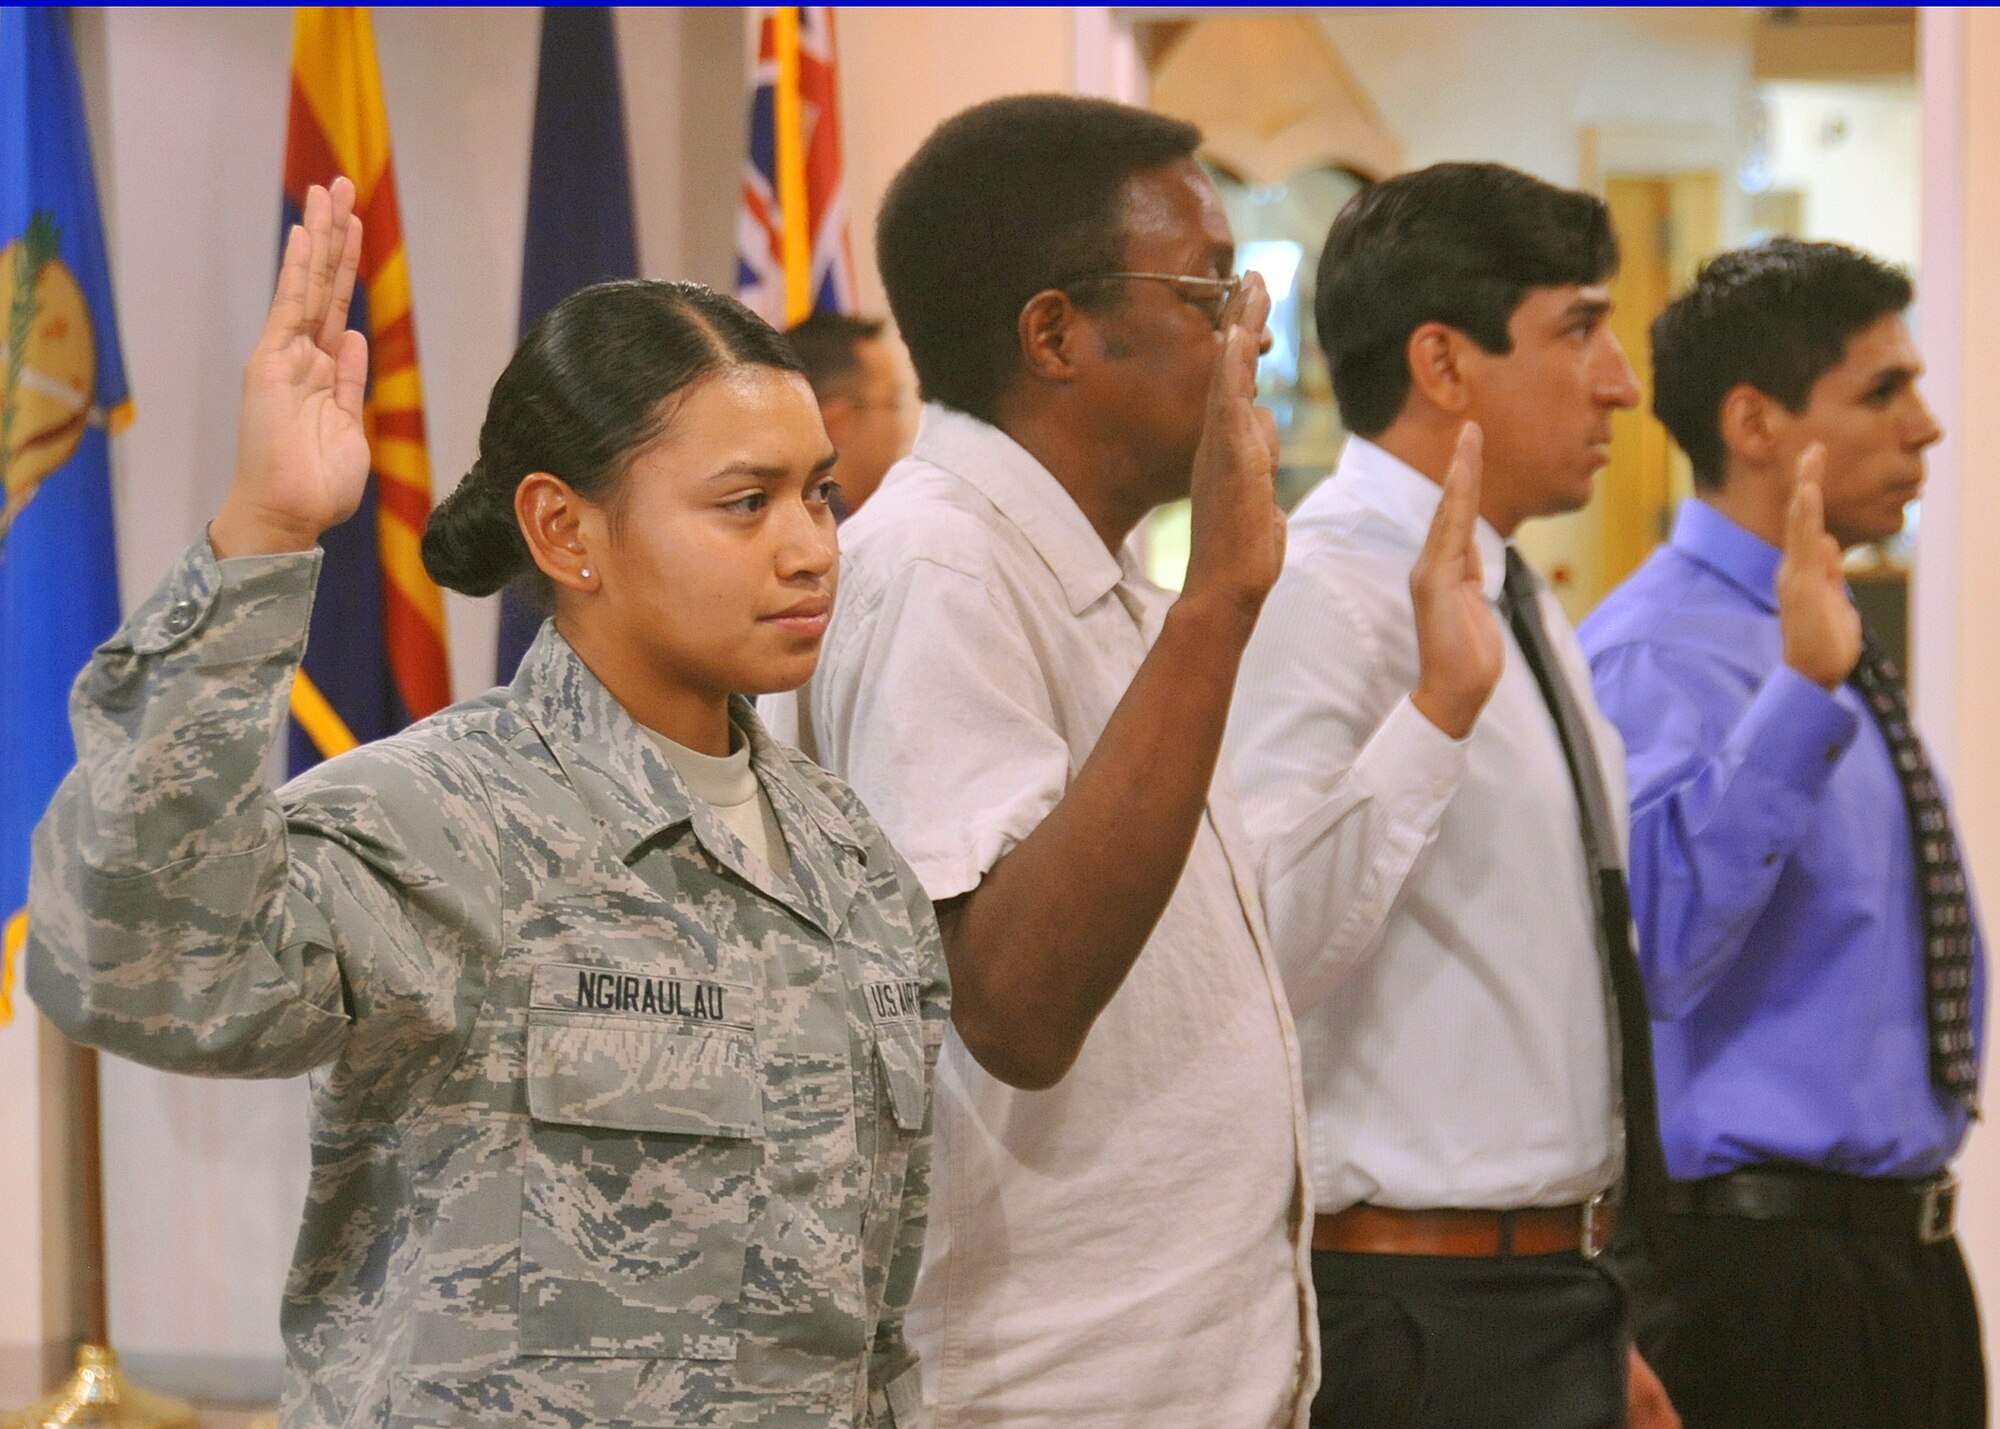 KIRTLAND AFB, N.M. -- Airman 1st Class Ngeluul Ngiraulau, 58th Special Operations Wing, was naturalized as a U.S. citizen Aug. 24 at the New Mexico Veterans Memorial. Ngiraulau was born in the Republic of Palau, but calls Reno, Nev., her hometown and has lived in the U.S. since she was 18 months old. Ngiraulau enlisted in the Air Force in May 2011. (Photo by Todd Berenger)